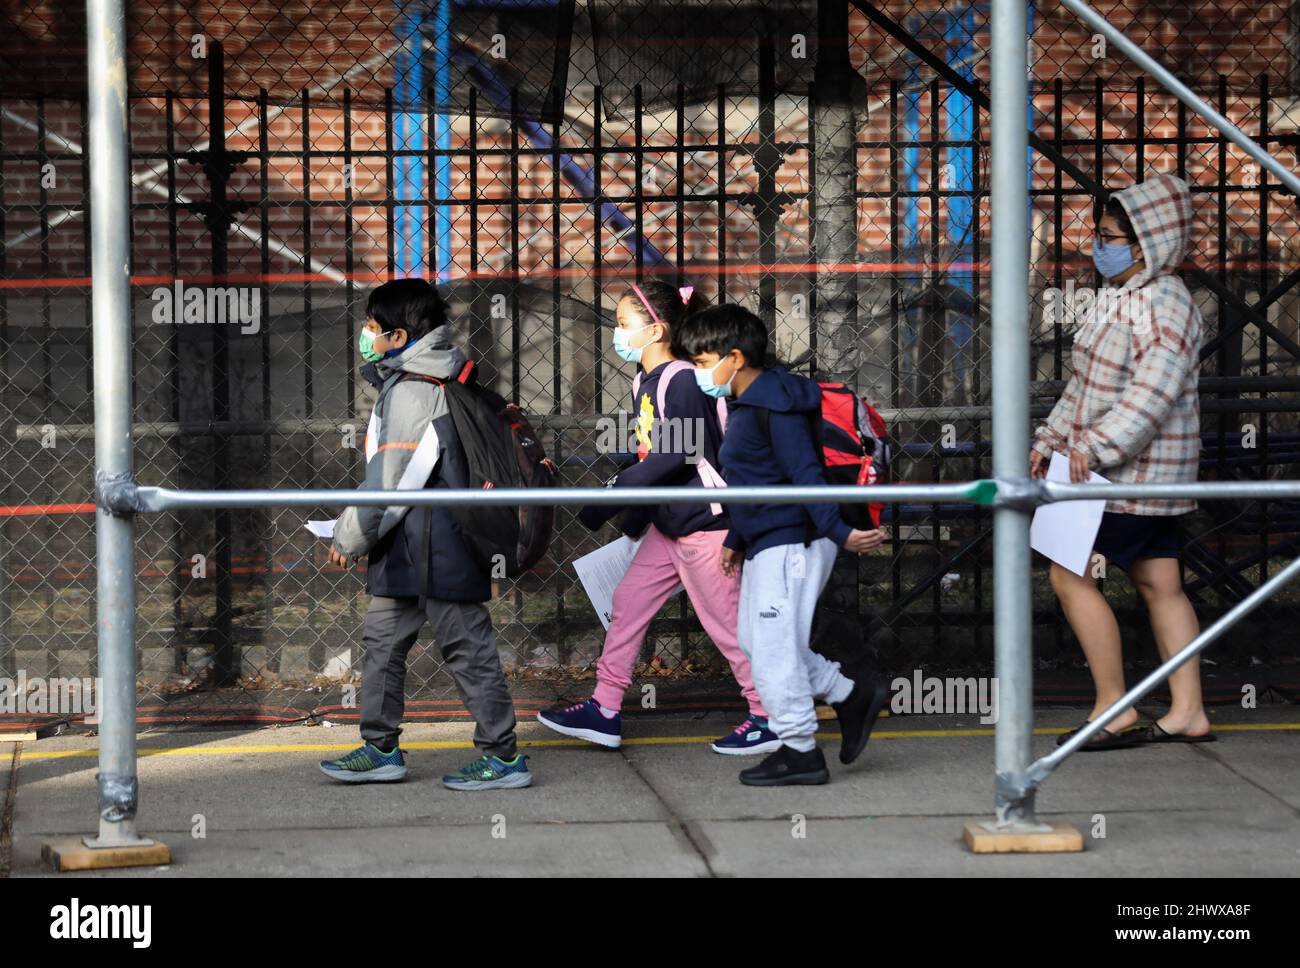 New York, USA. 7th Mar, 2022. Children go to school in New York, the United States, March 7, 2022. New York City has suspended COVID-19 vaccine passport program and remove indoor mask mandate in public schools for K-12 students starting from Monday. Credit: Wang Ying/Xinhua/Alamy Live News Stock Photo